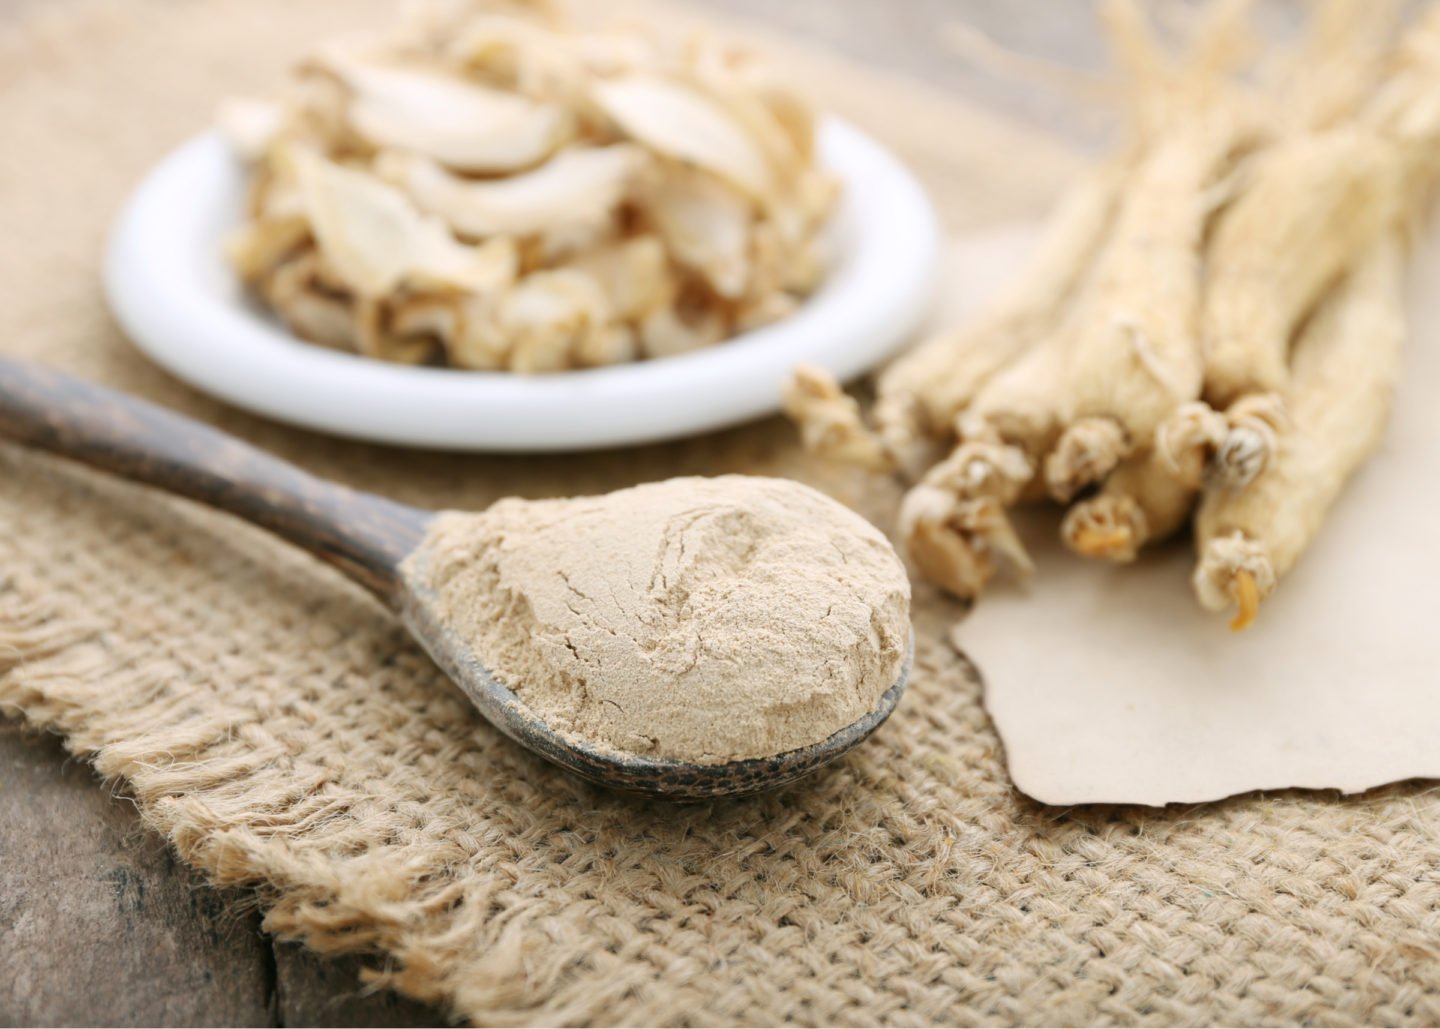 ginseng powder in a spoon alongside ginseng roots